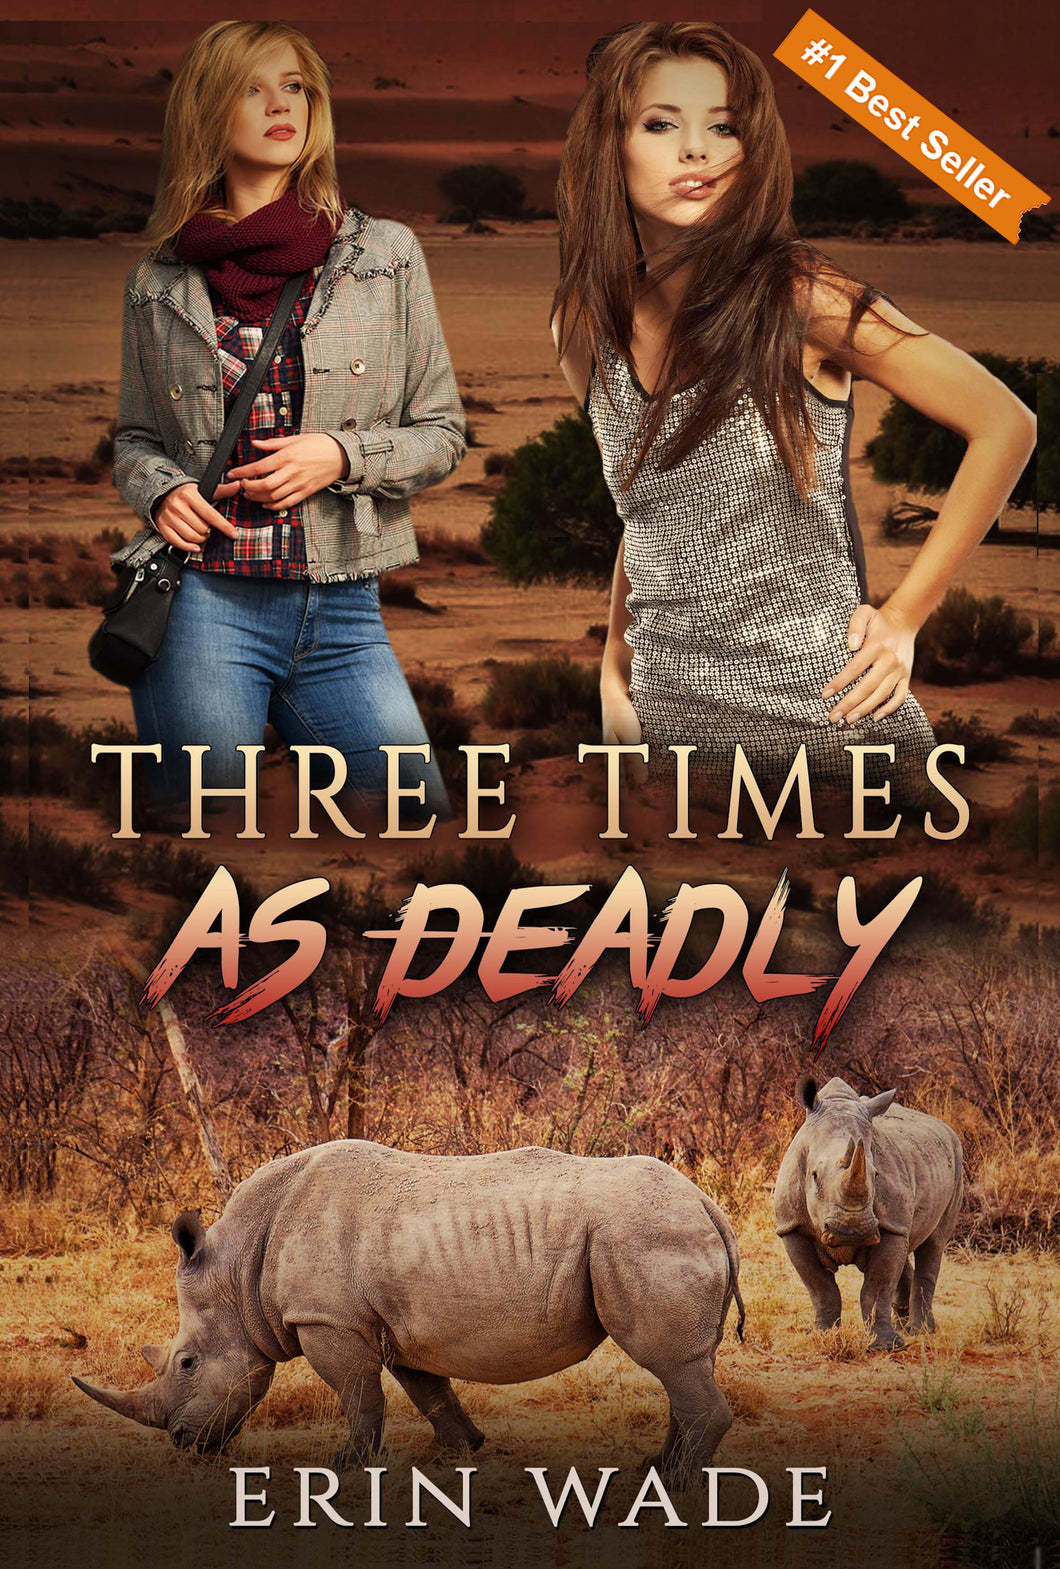 Three Times as Deadly - Autographed by Erin Wade